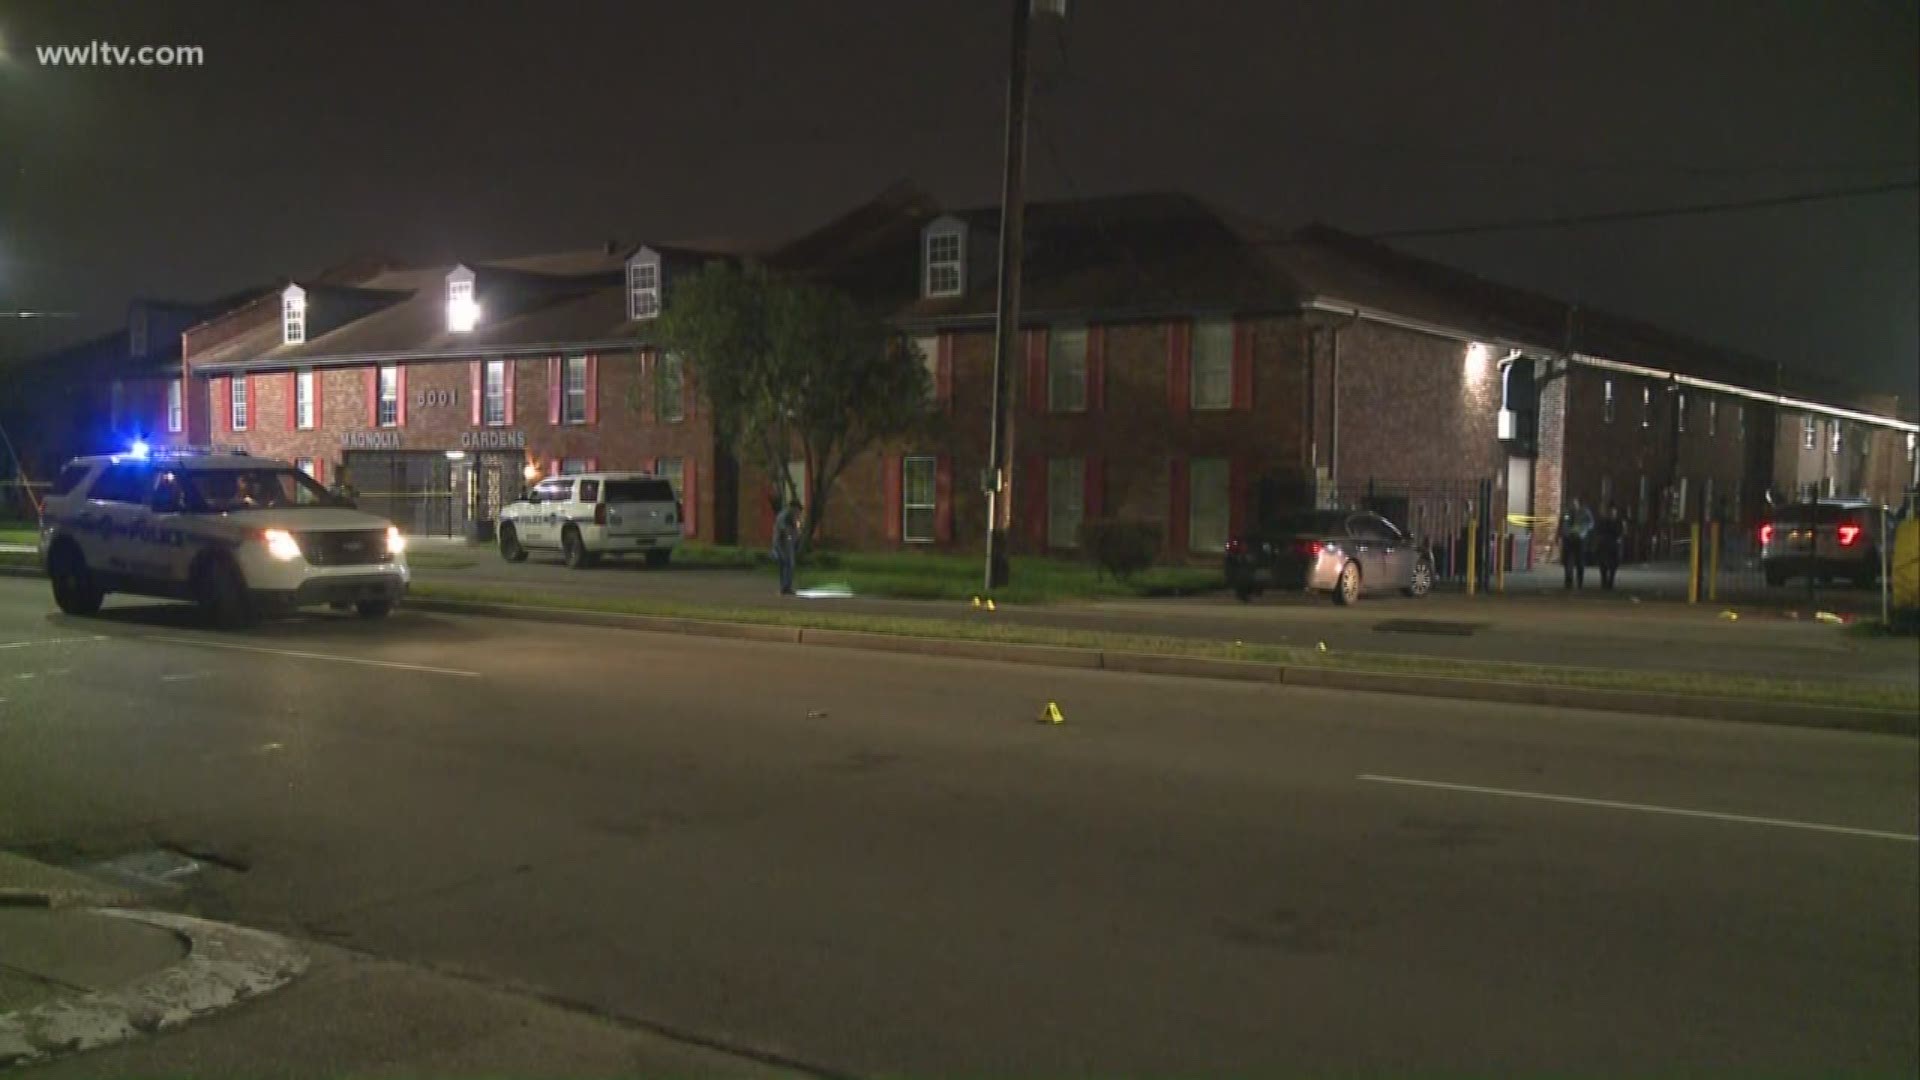 Police say the man was shot multiple times in New Orleans East early Wednesday, Feb. 19.